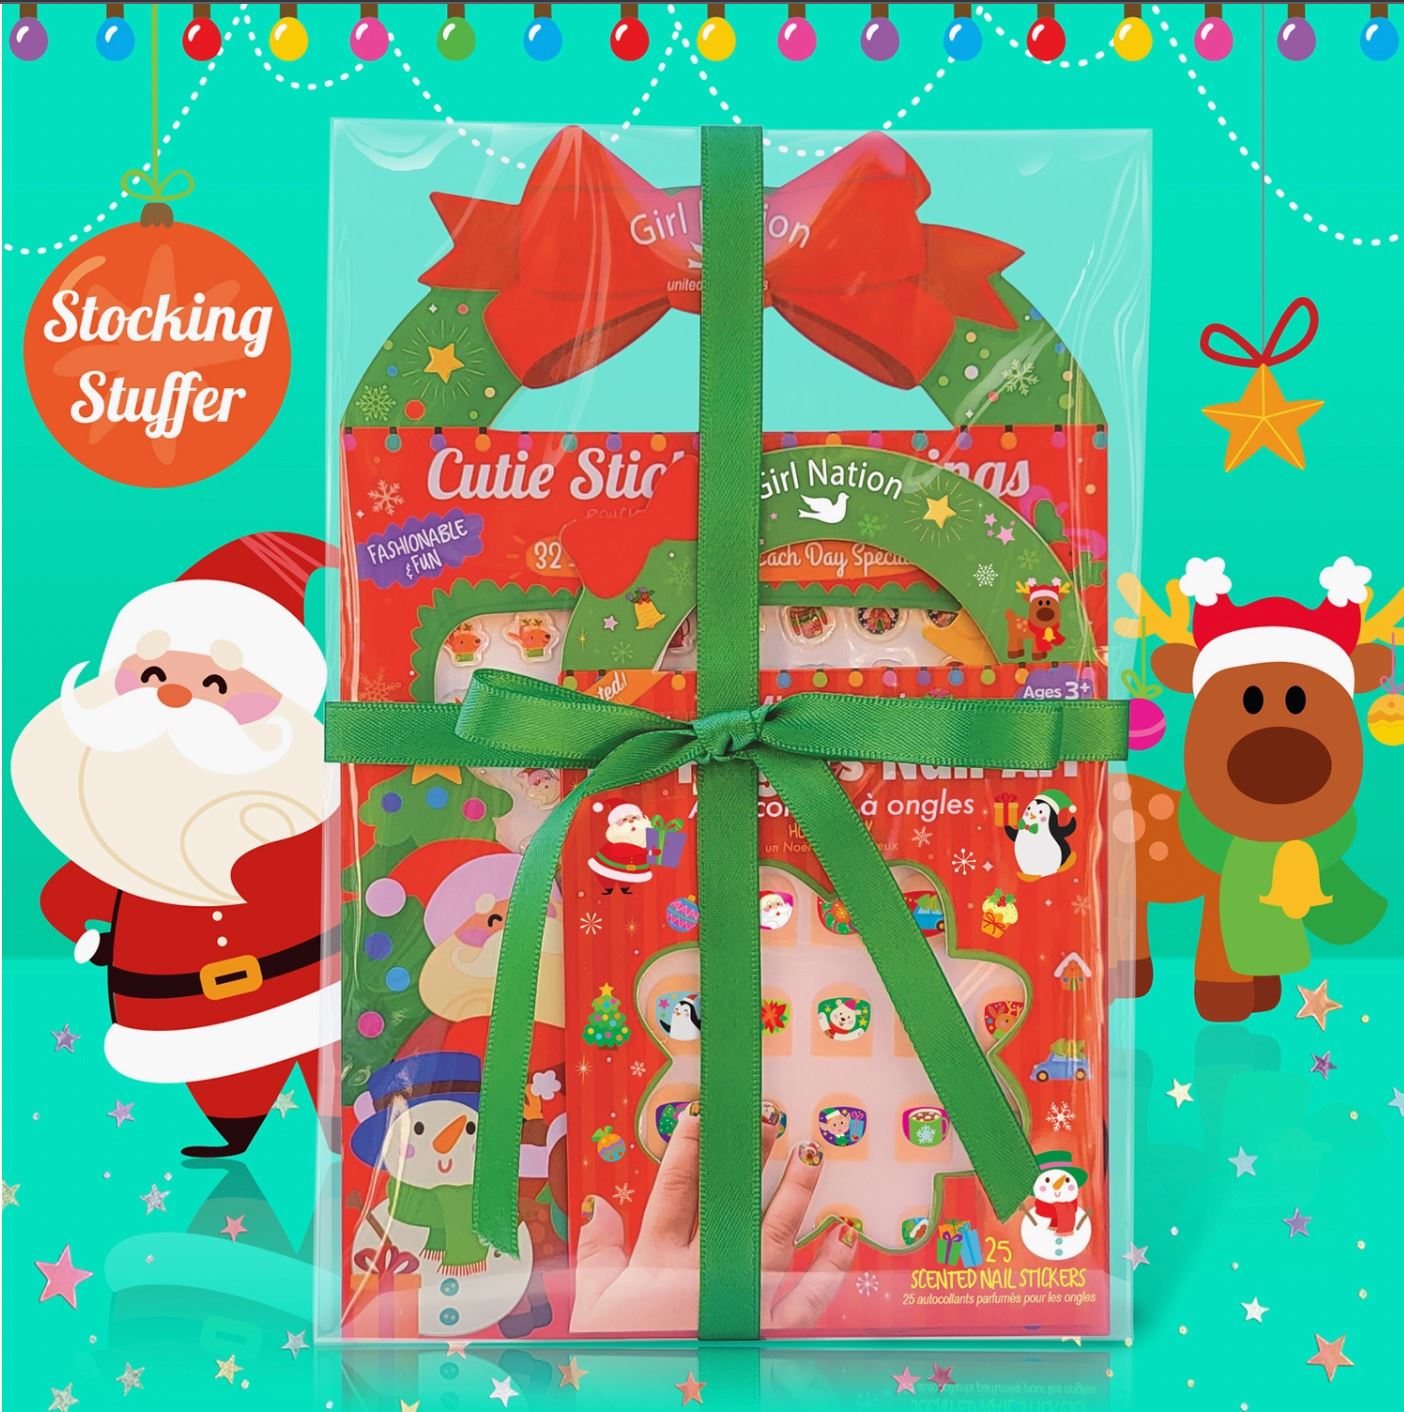 Holiday Stick-On Earring and Nail Sticker Gift Set girl nation 